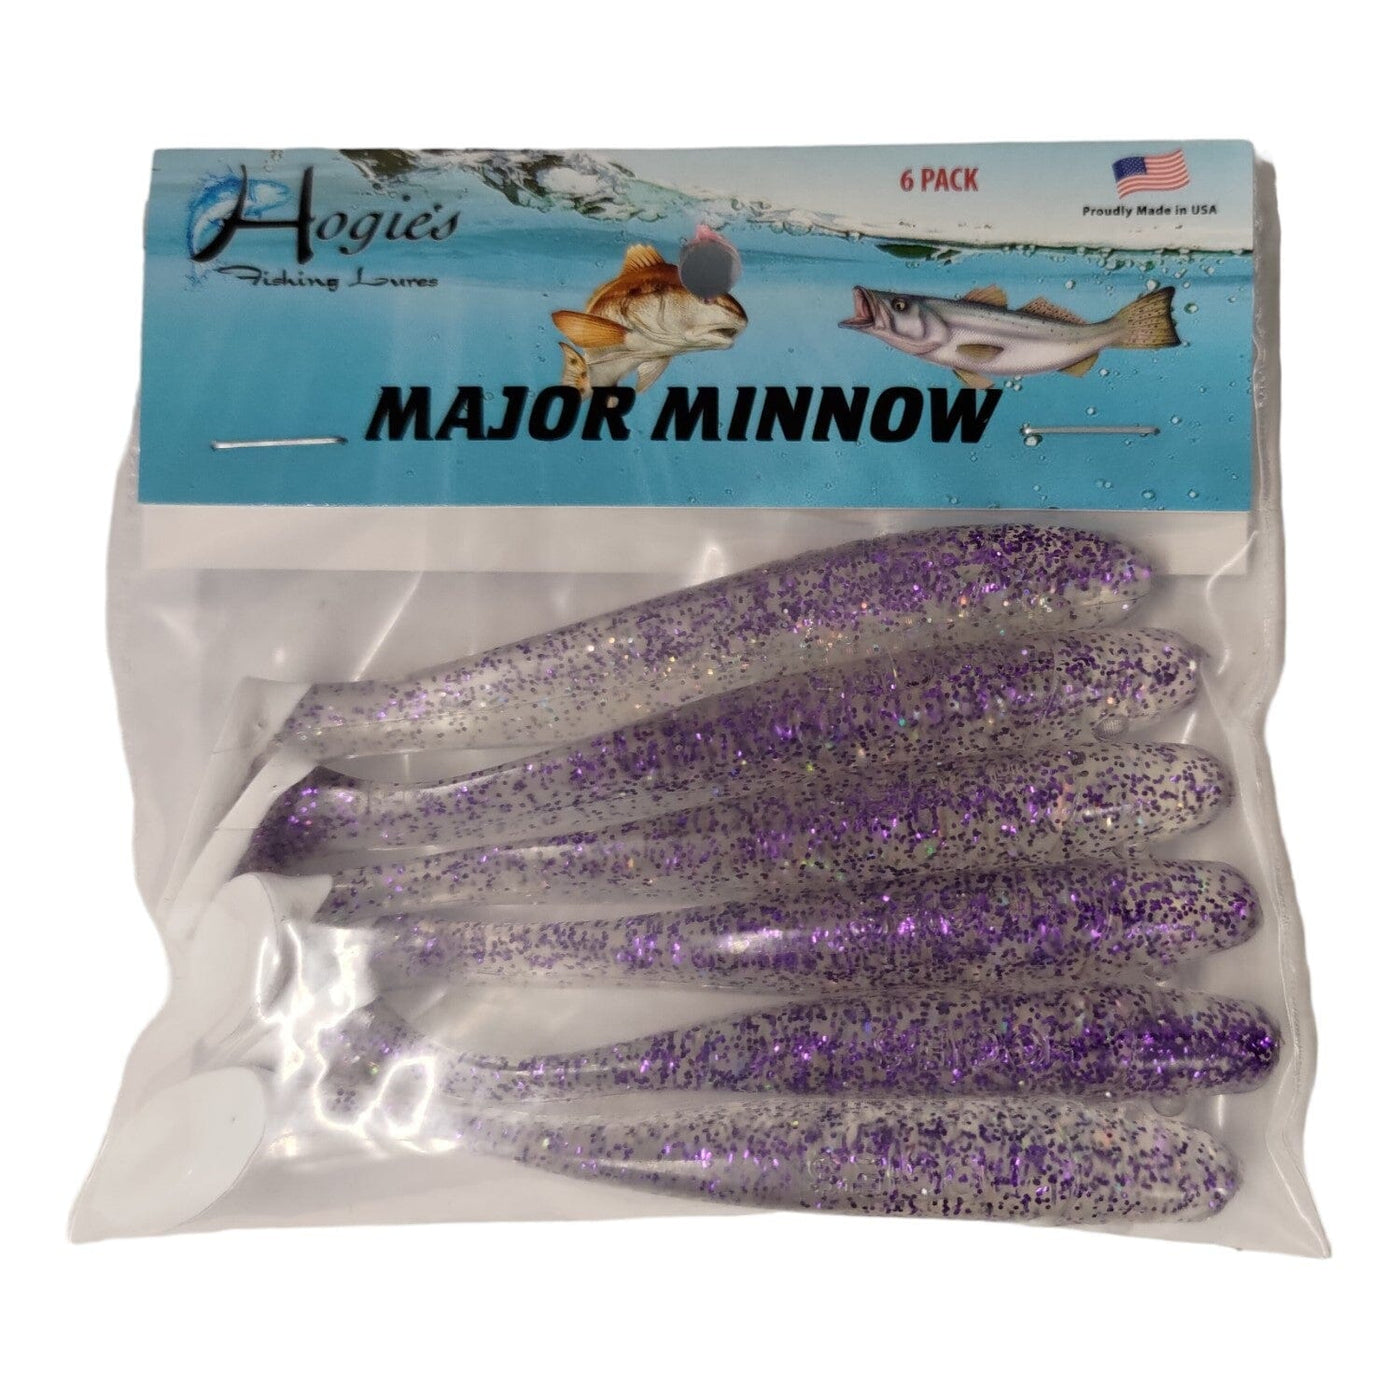 Norton Lures Bull Minnows lures plum Color Lot Of 2